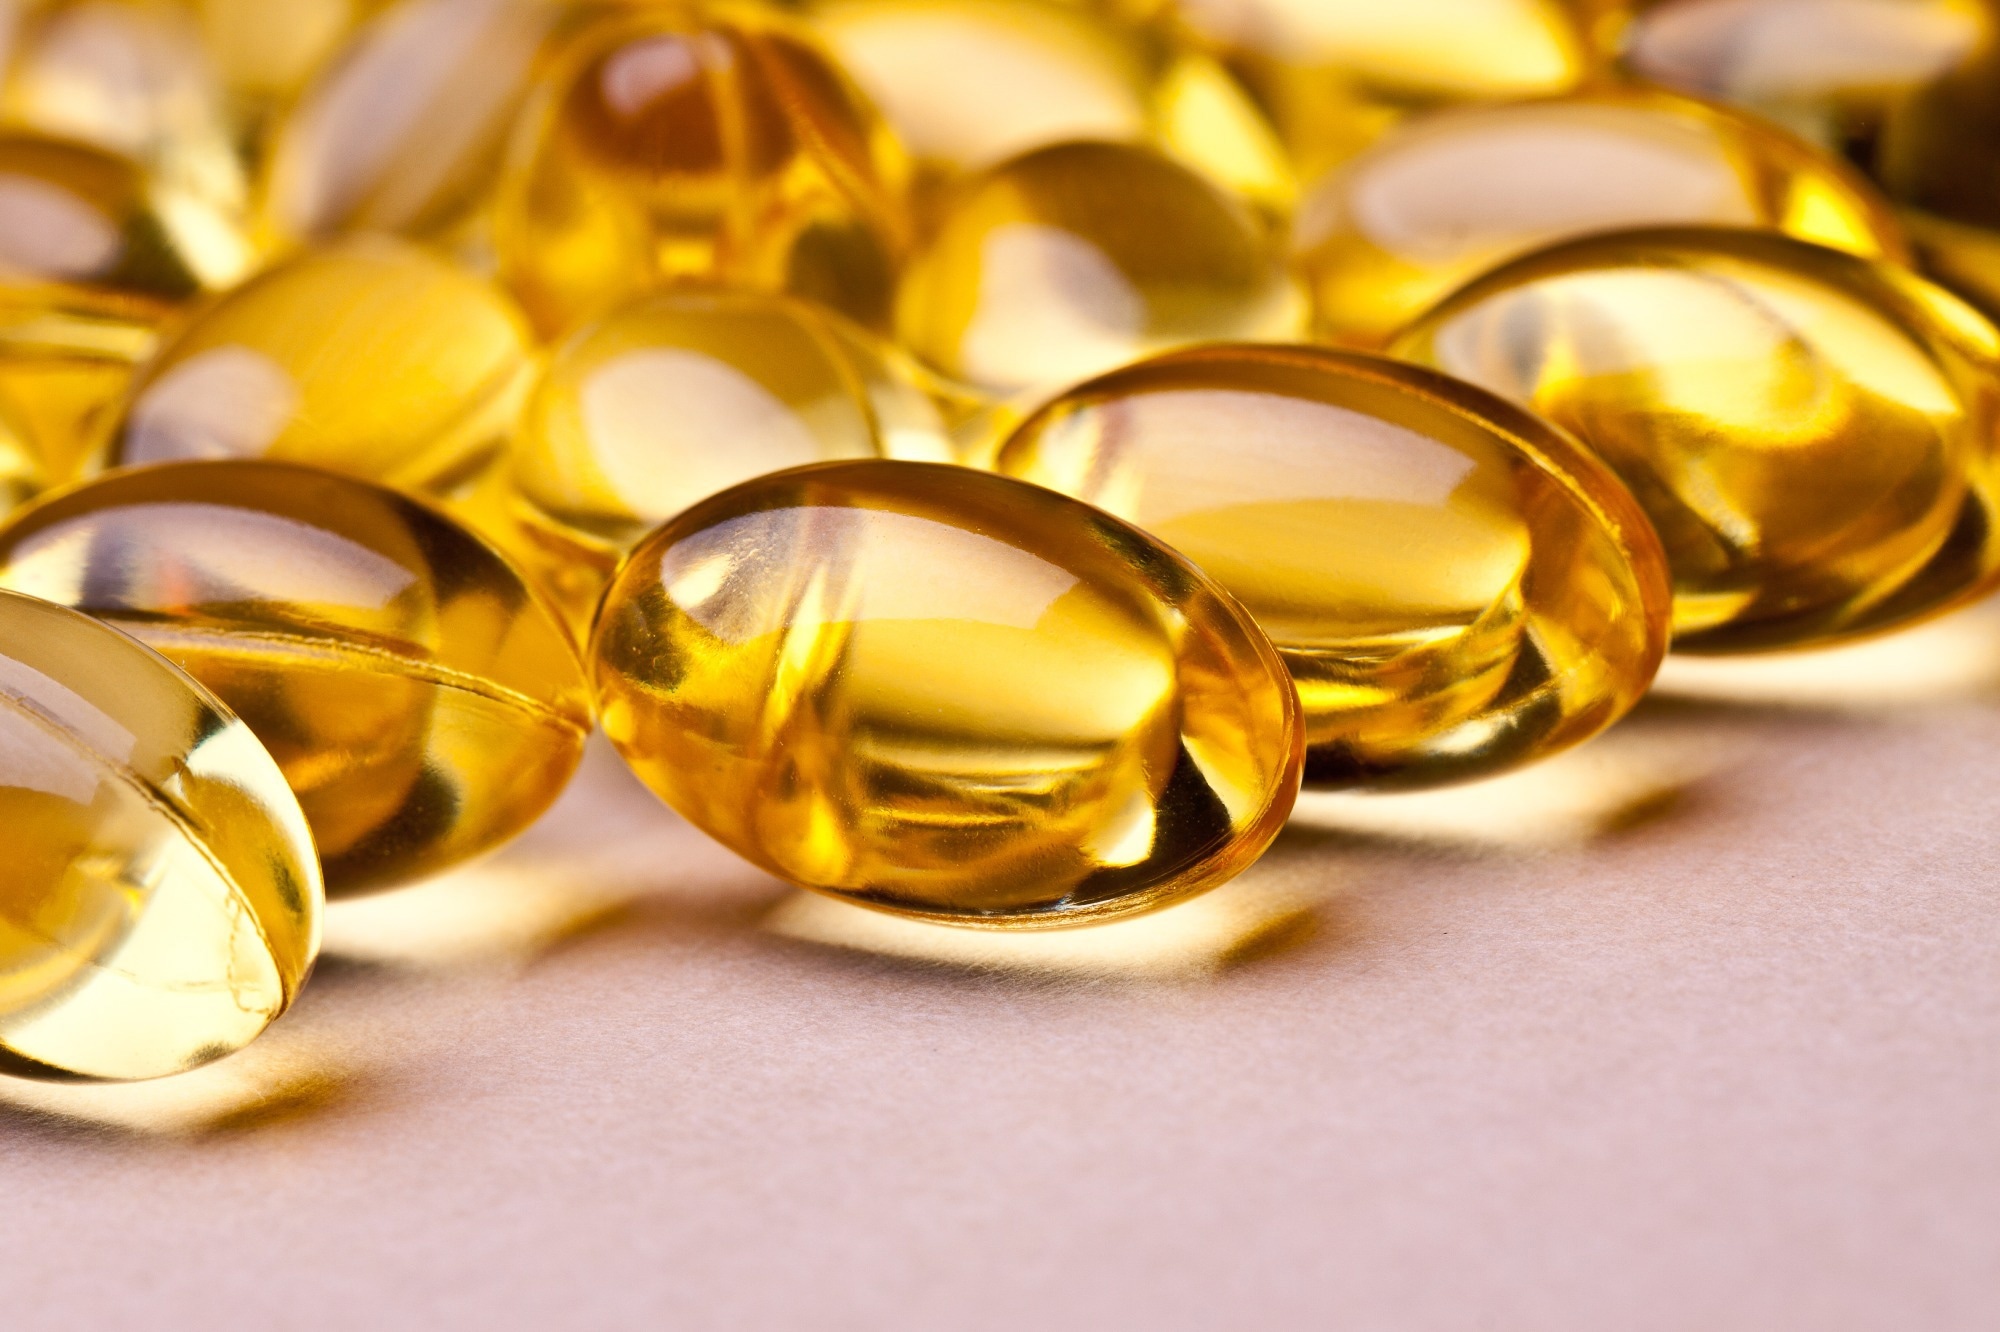 Vitamin D supplementation reduces risk of serious cardiovascular events in older people